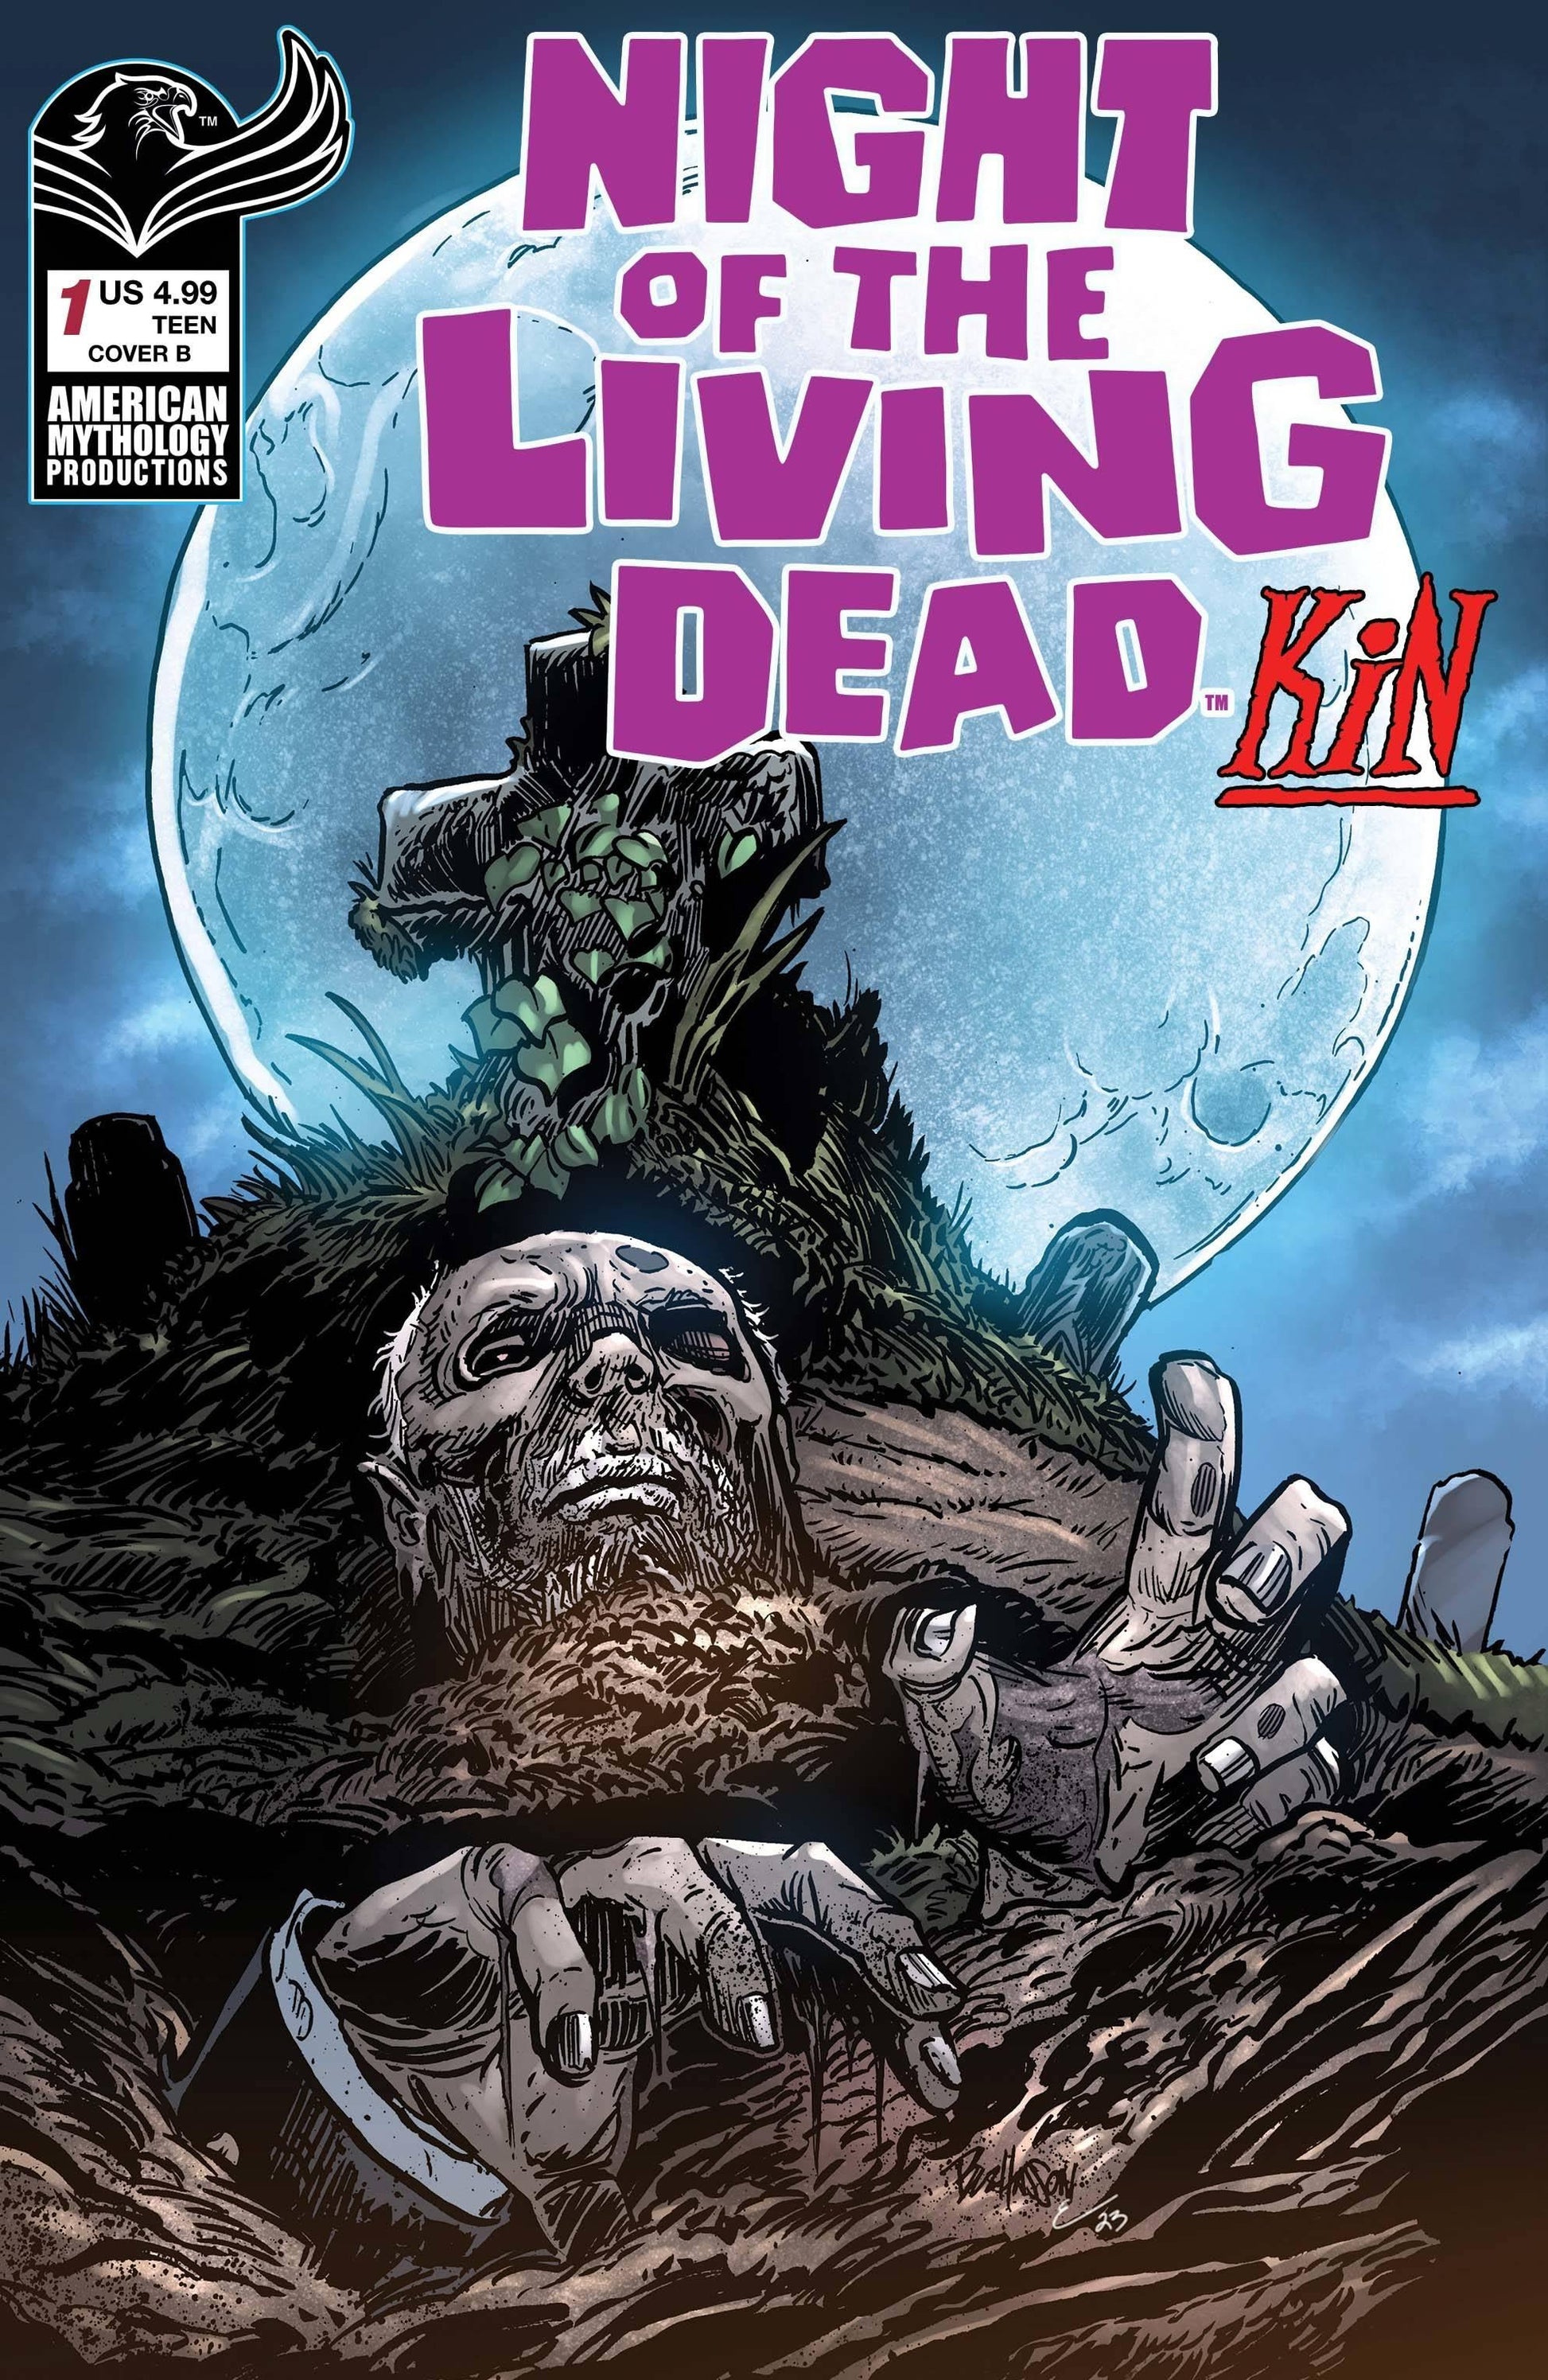 NIGHT OF THE LIVING DEAD KIN #1 CVR B HASSON OUT OF GRAVE - HolyGrail Comix